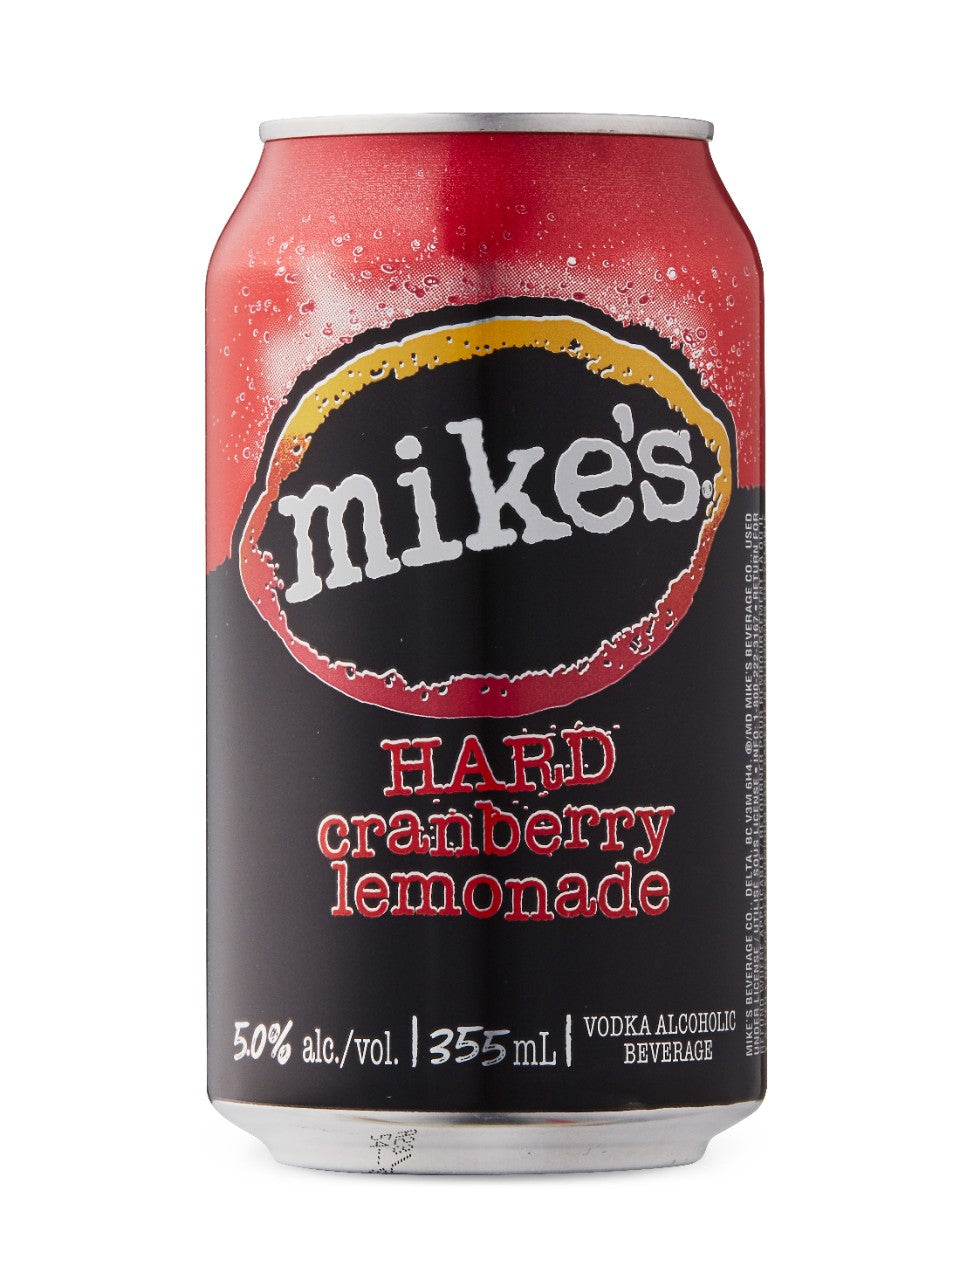 Mike's Hard Cranberry 6 x 355 ml can